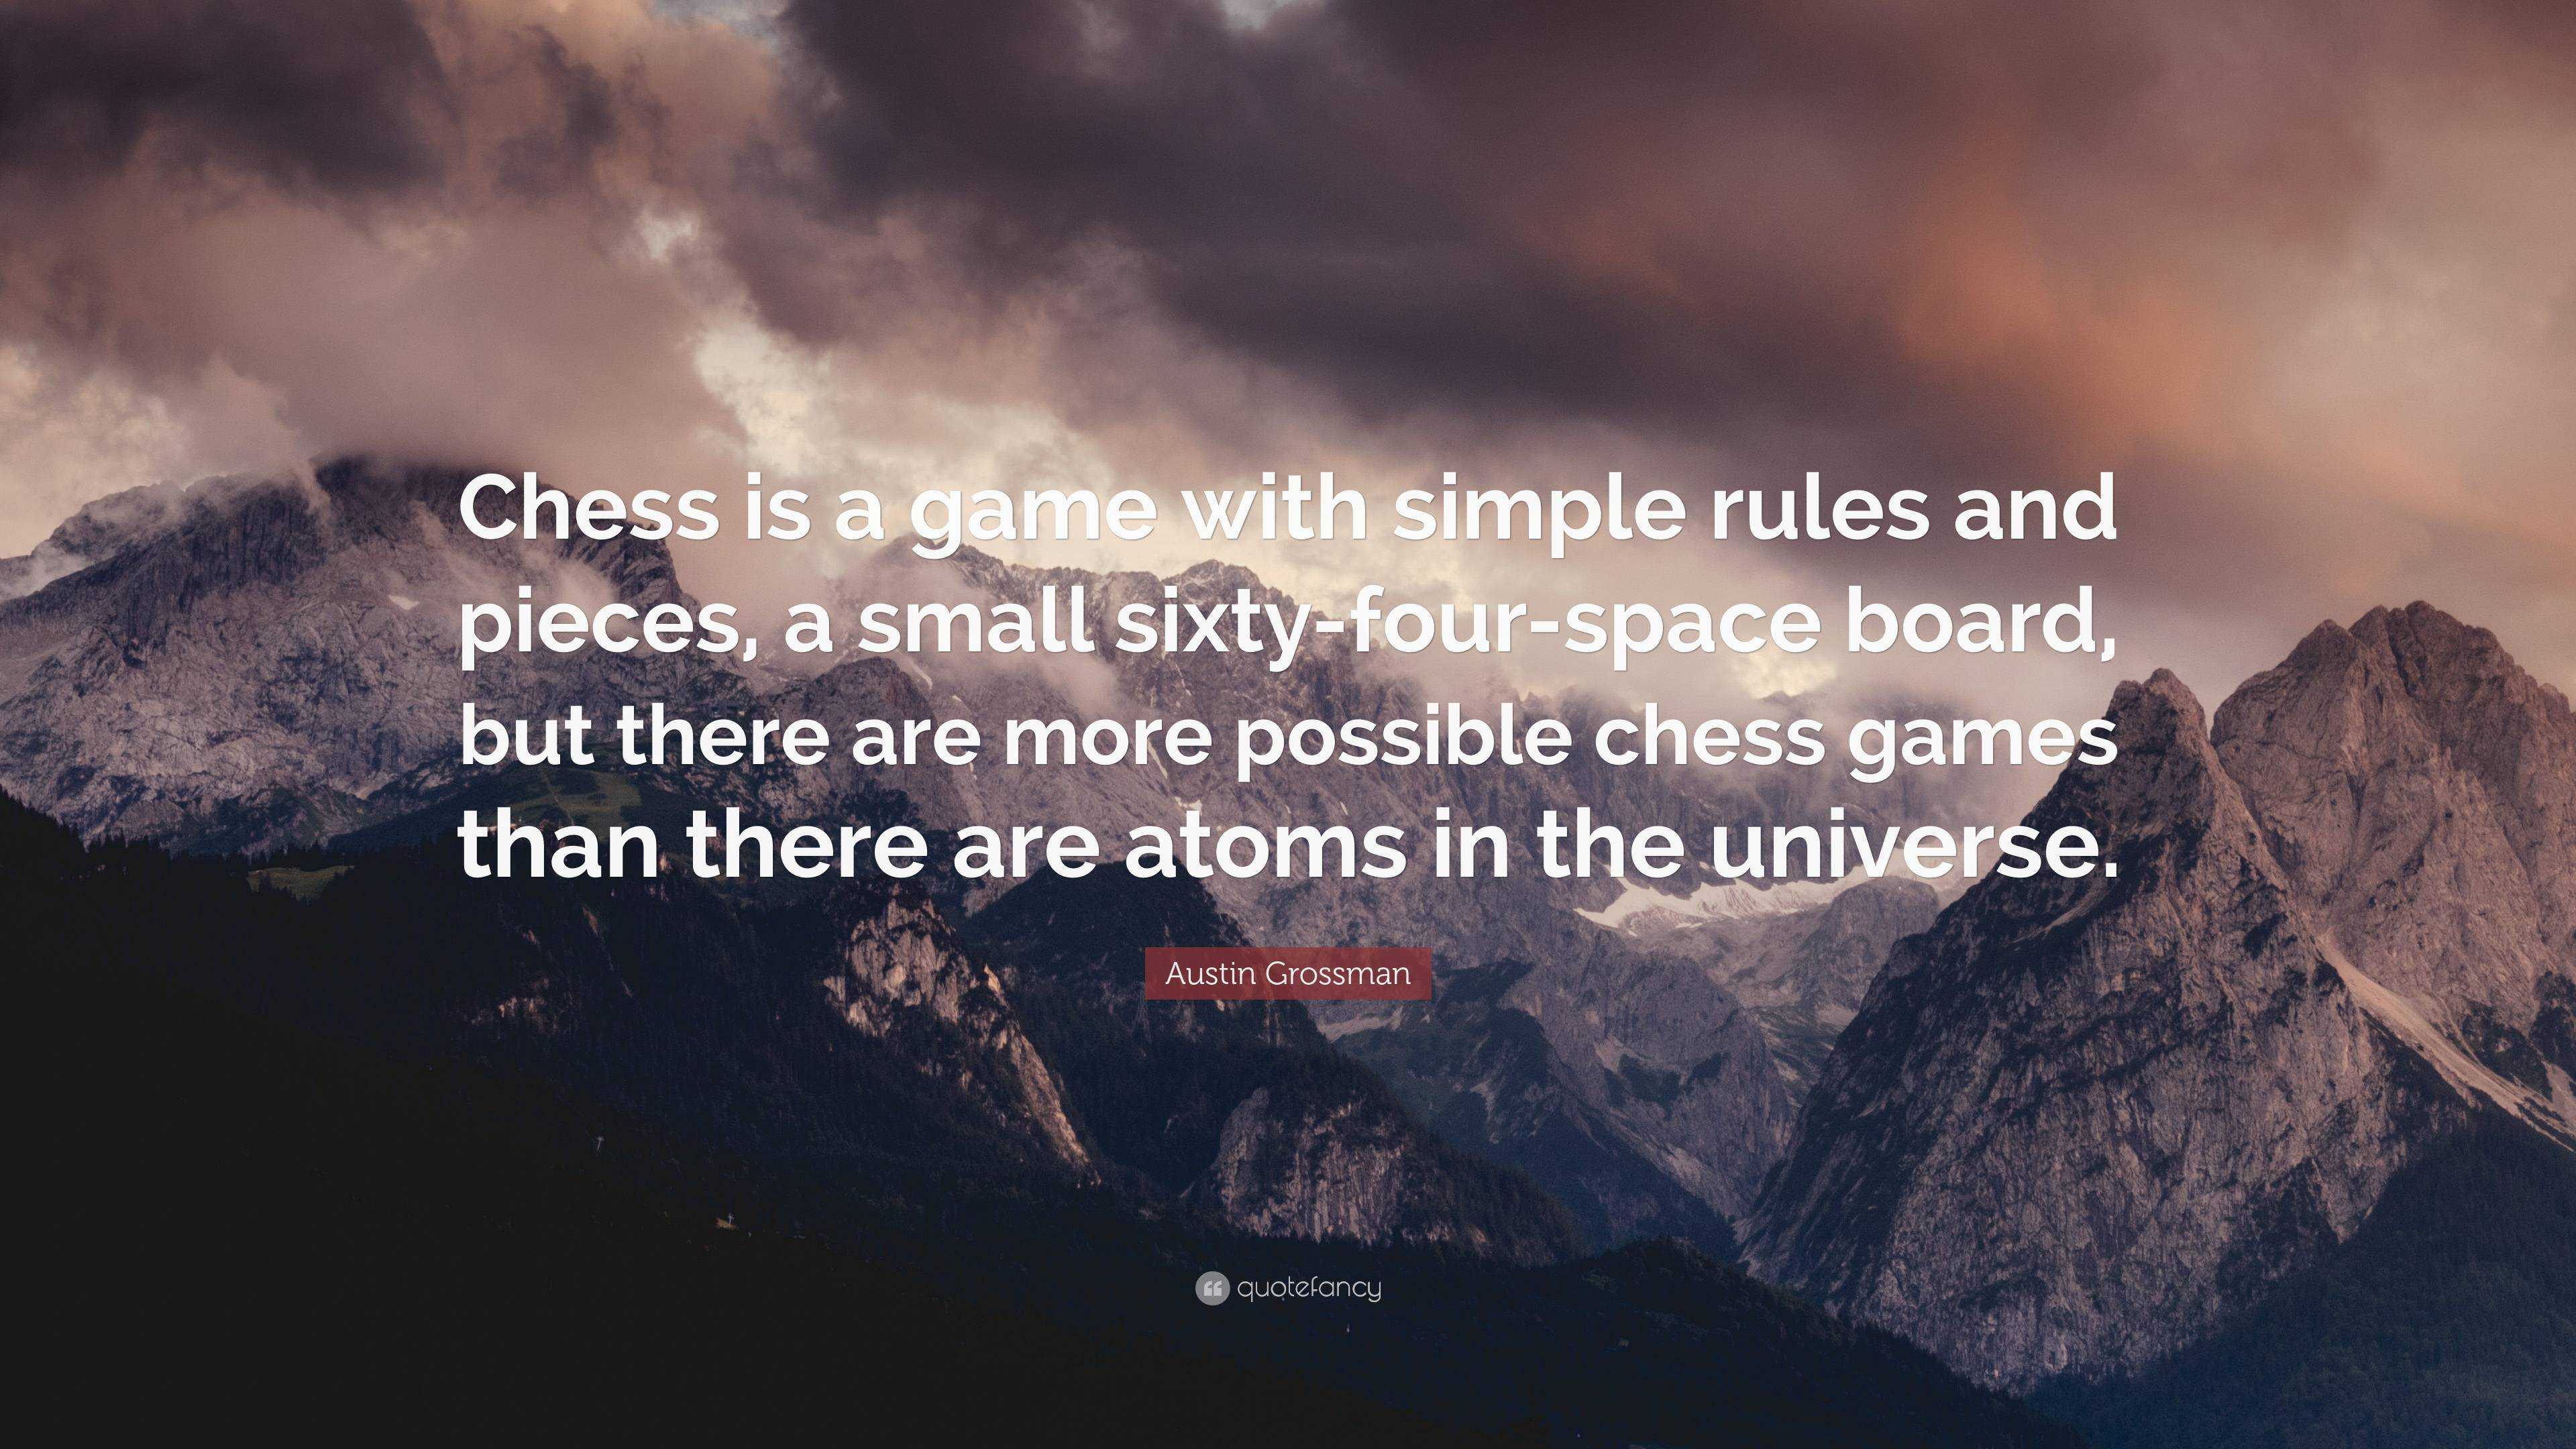 Austin Grossman Quote: “Chess is a game with simple rules and pieces, a  small sixty-four-space board, but there are more possible chess games th”